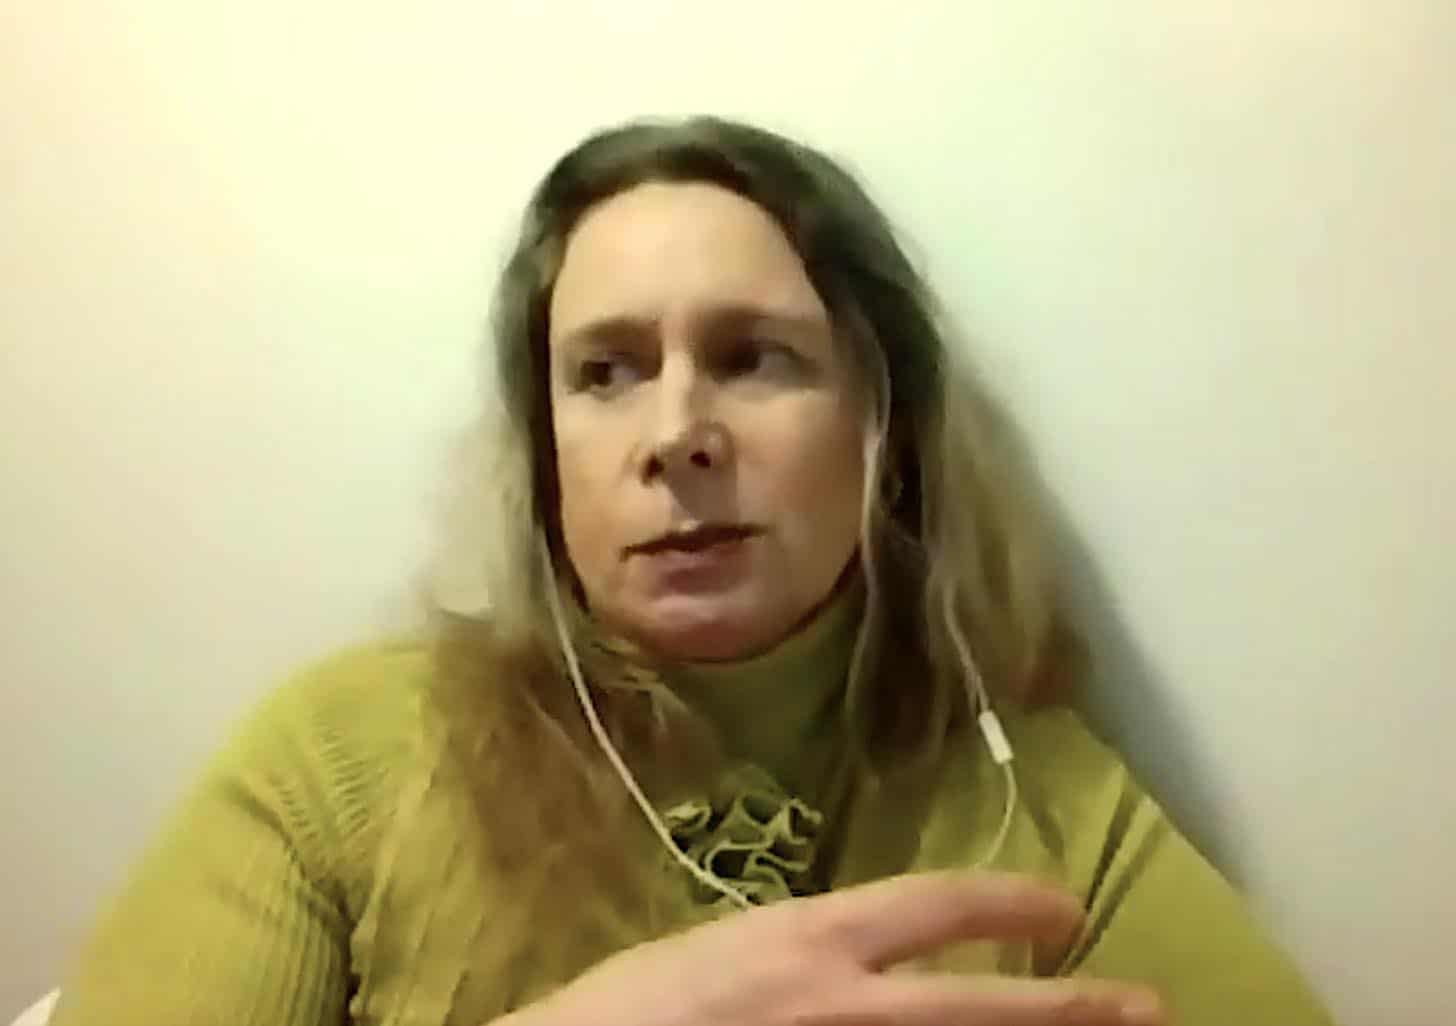 Claire Smith spoke to us from Ireland. She runs VEGN, a success cruelty-free, vegan ETF.